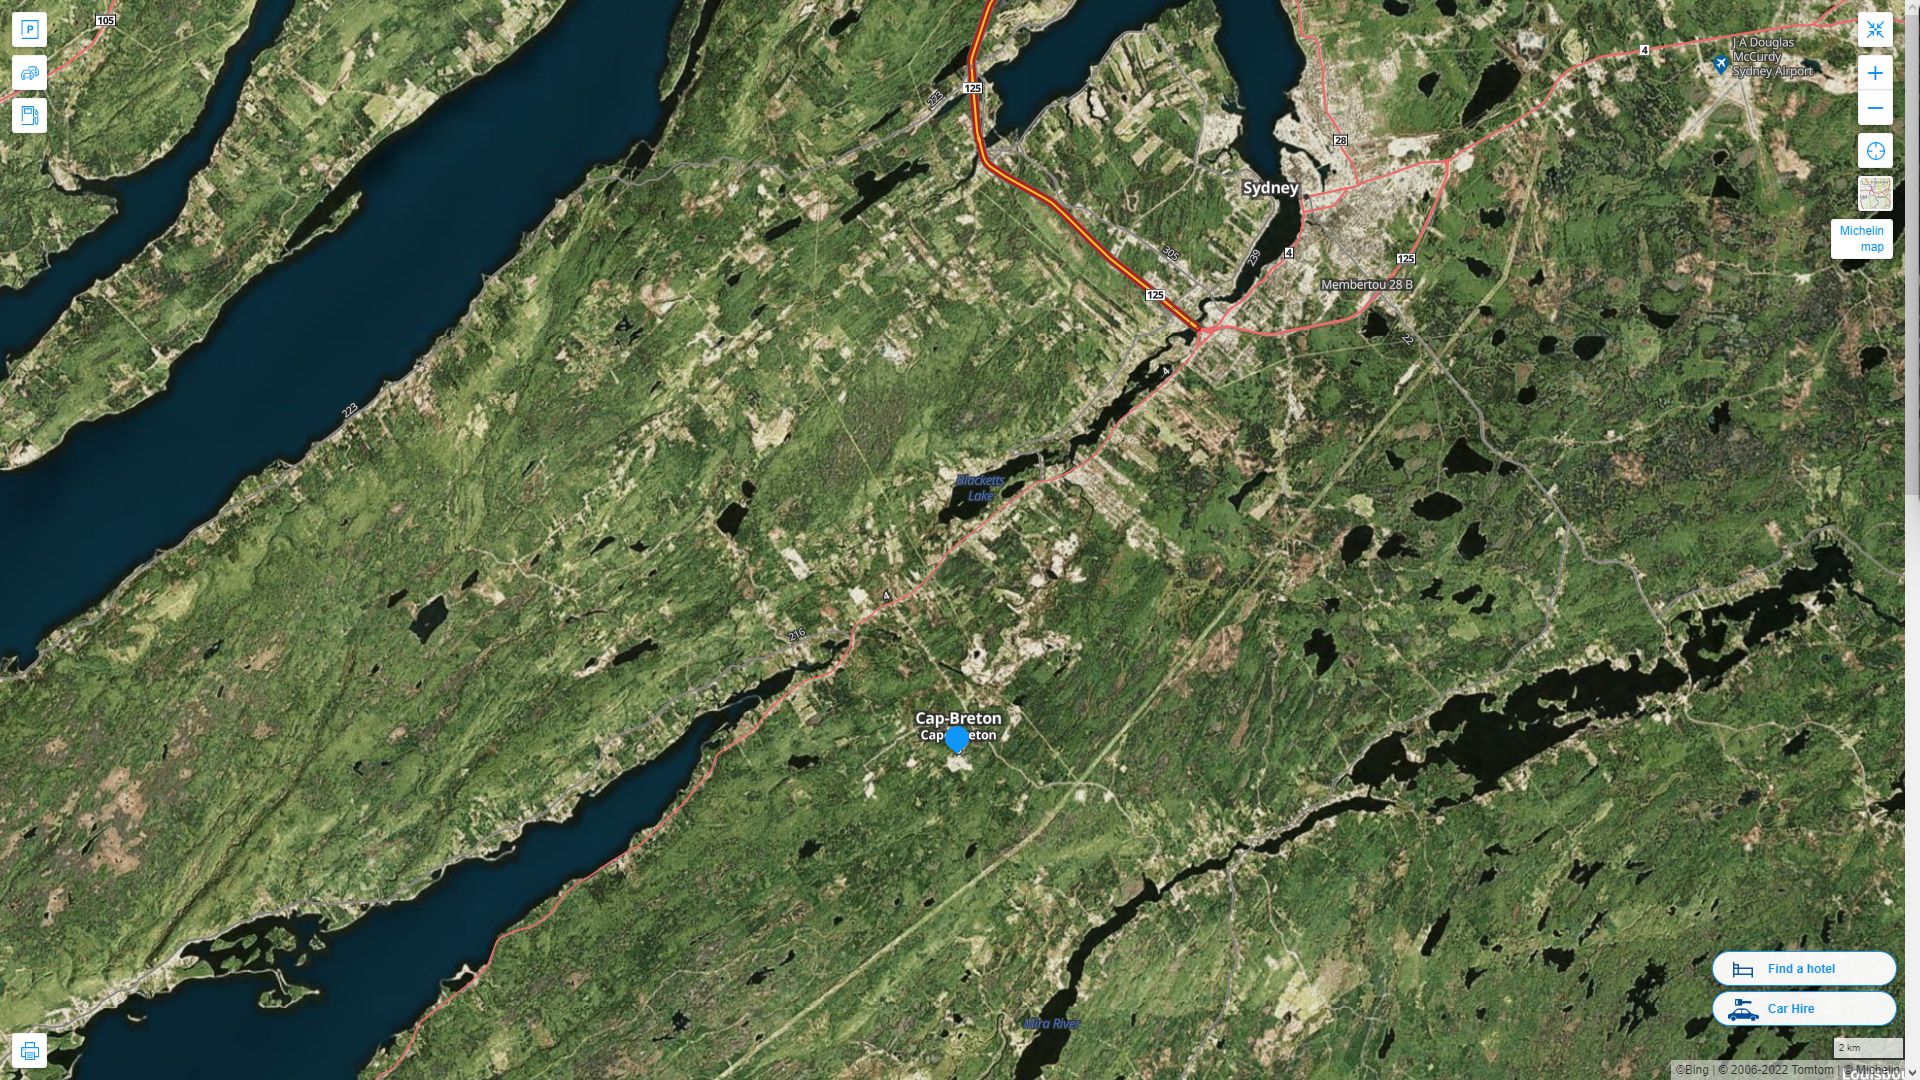 Cape Breton Highway and Road Map with Satellite View